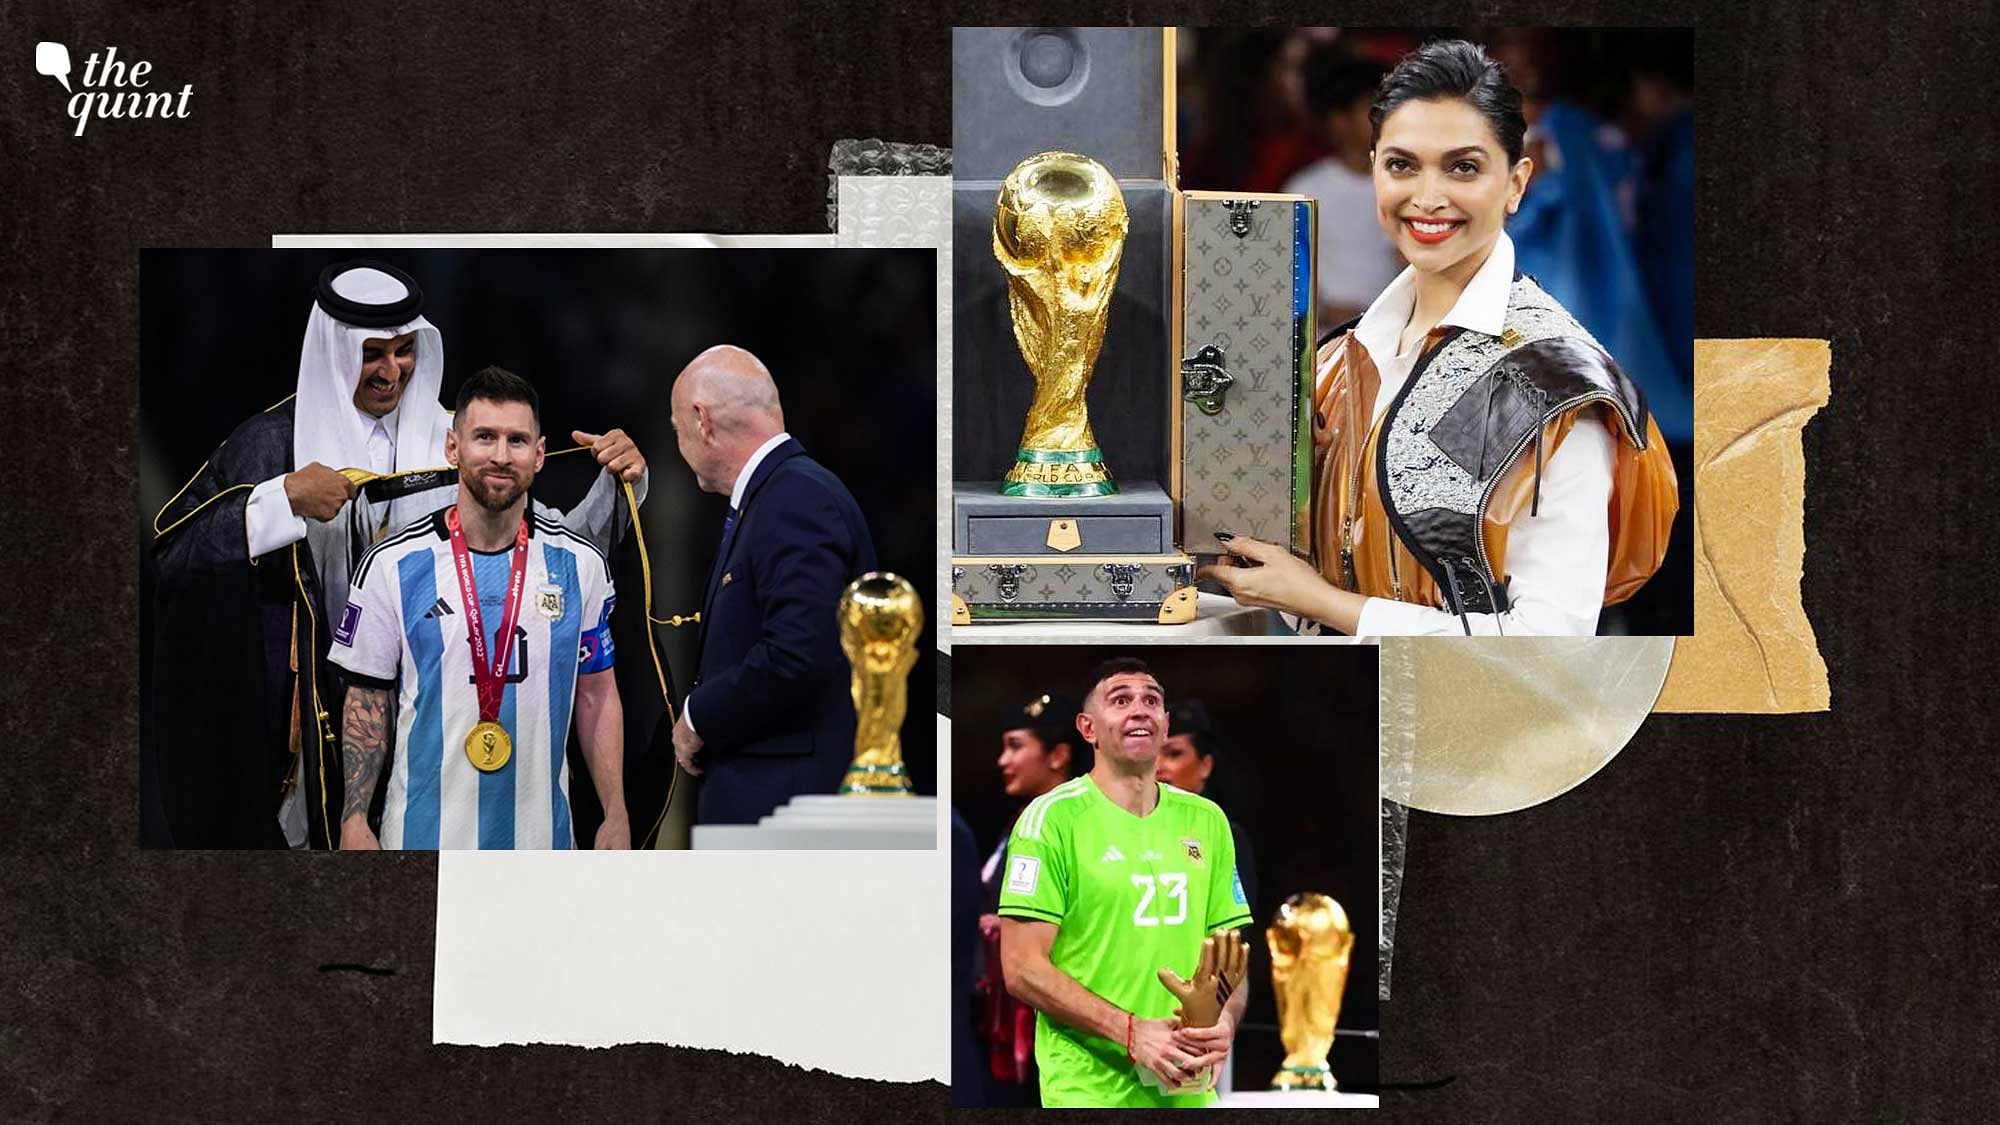 Deepika Padukone unveils FIFA World Cup trophy; don't miss her